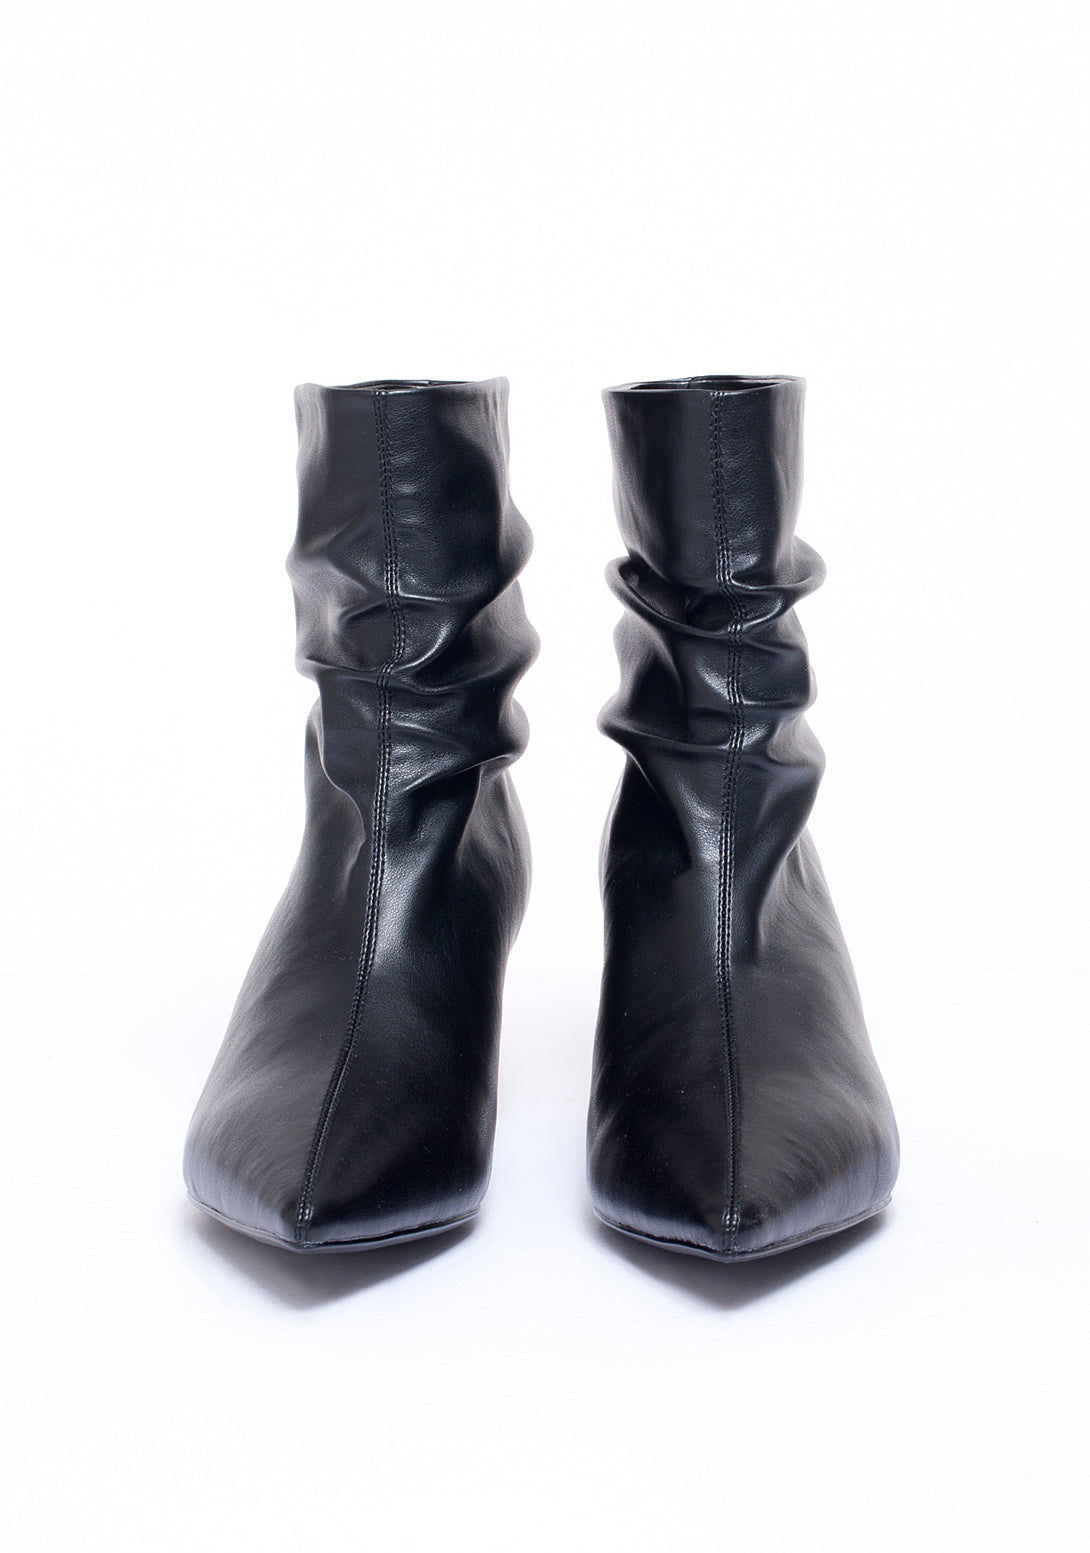 Ankle boots made in eco leather